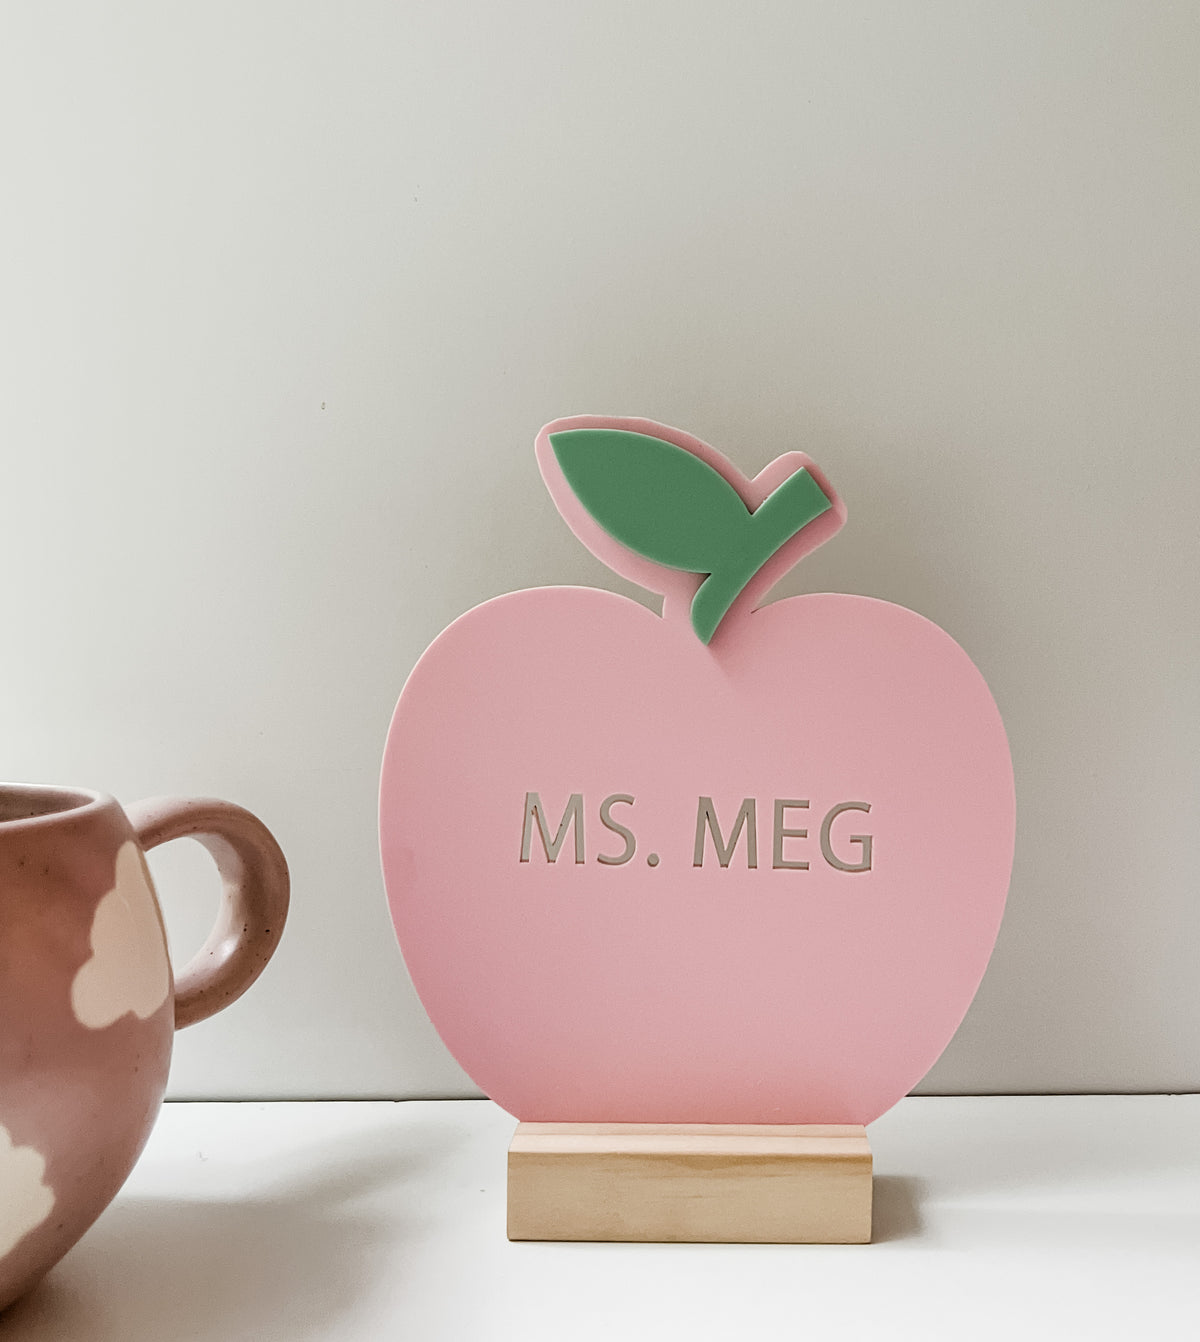 Personalized Apple Desk Sign